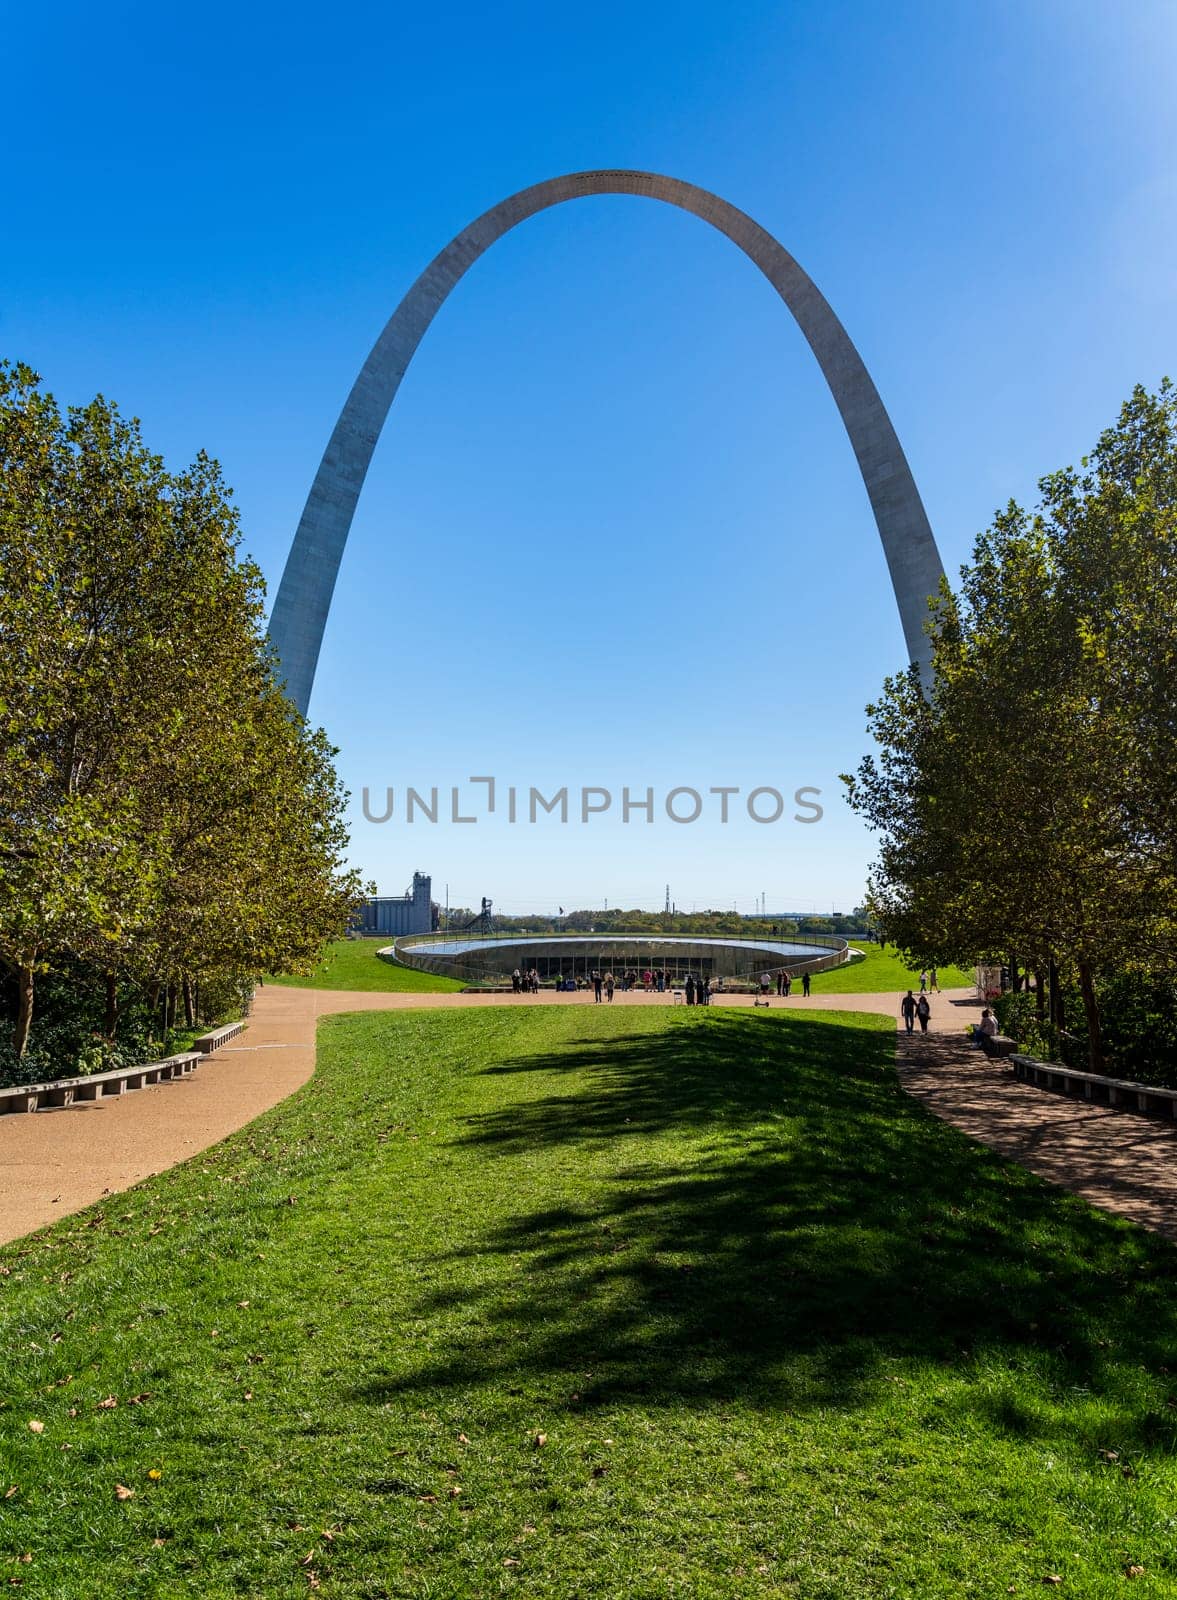 Gateway Arch of St Louis Missouri seen from Old Courthouse by steheap